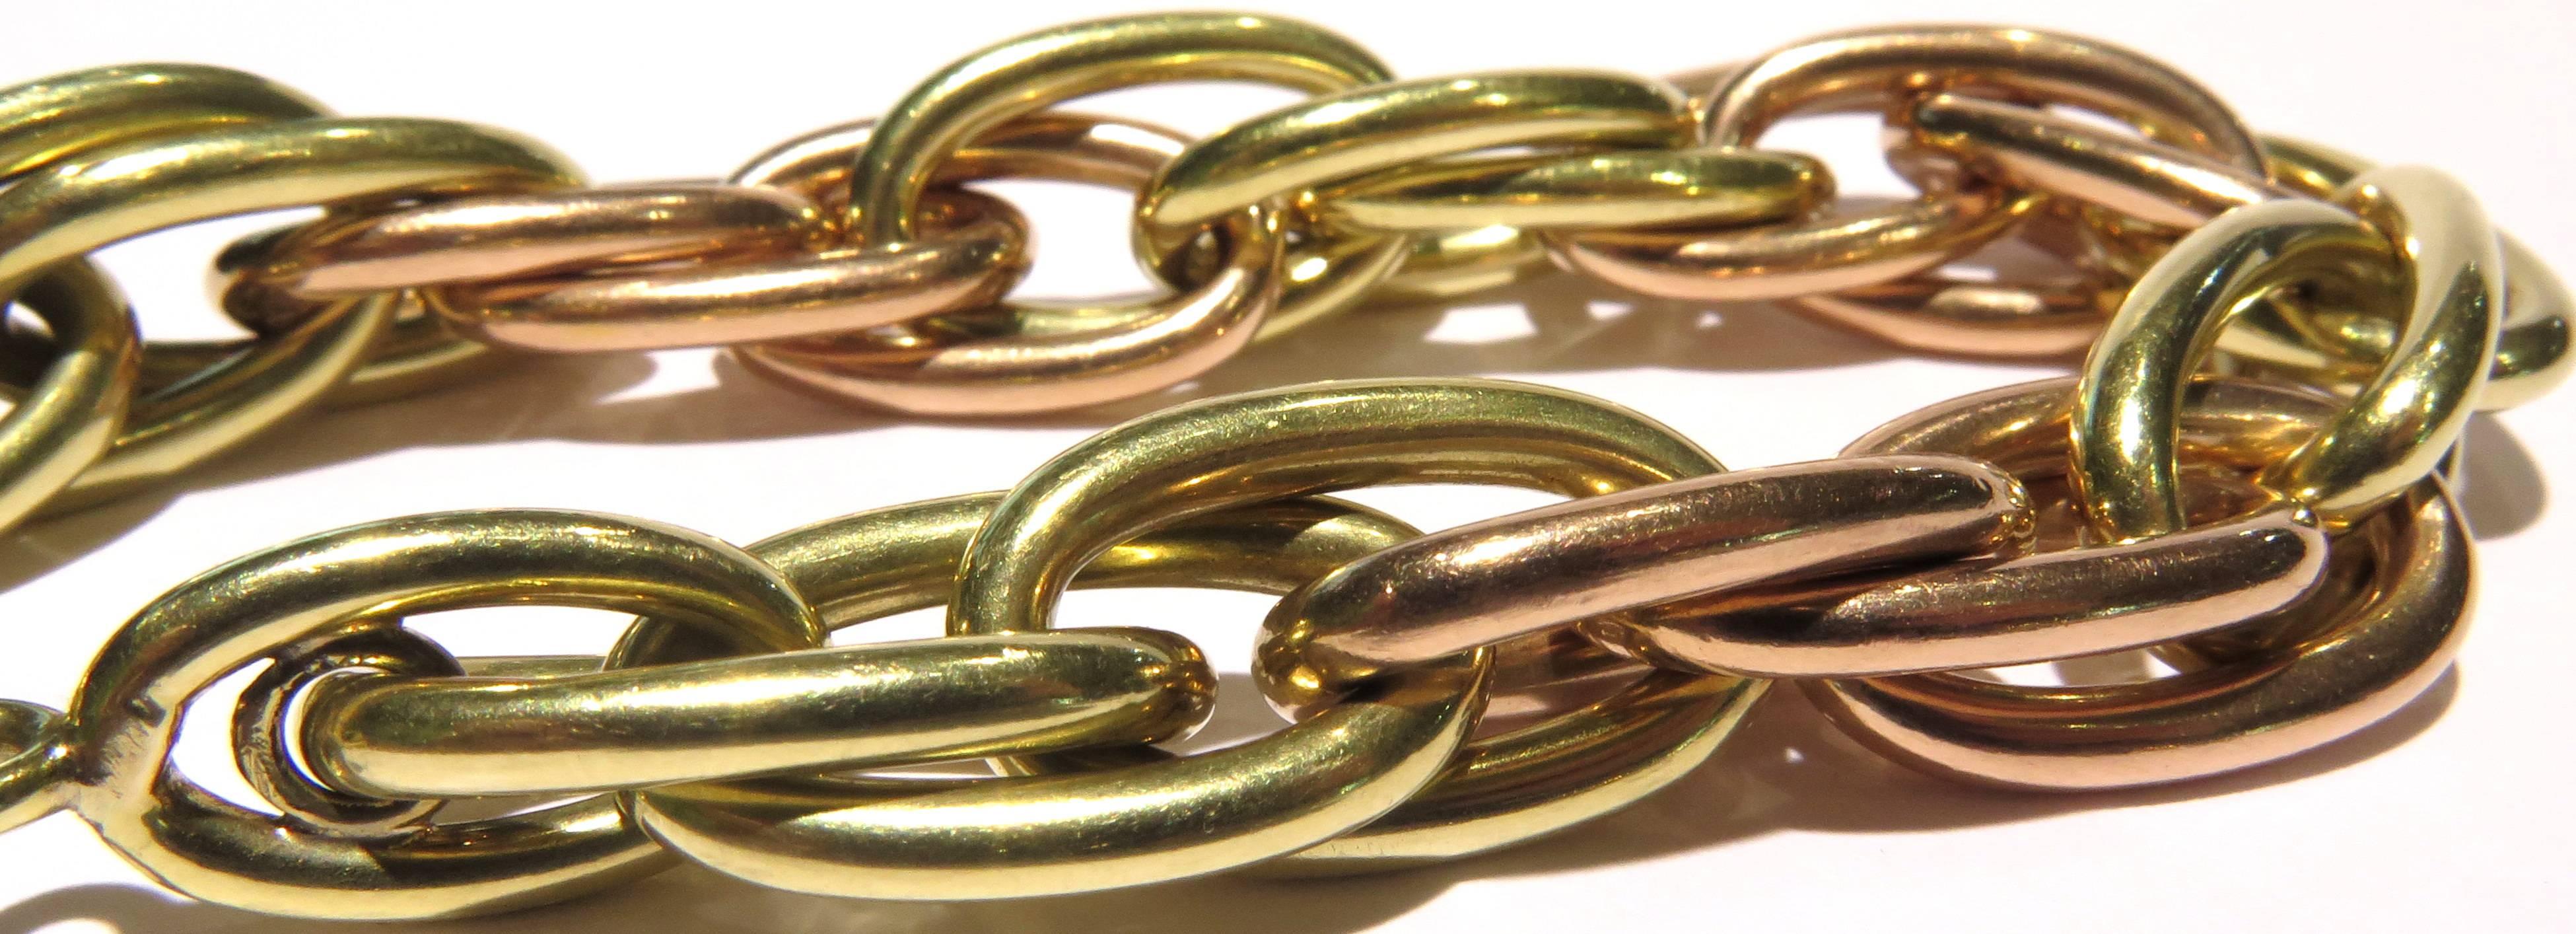 This 14k oversized intertwined oval hollow link bracelet is sure to get you many compliments! This retro bracelet with it's rose & yellow gold links is a real stunner and a perfect example of 1940's jewelry.
This bracelet weighs 35.9 grams
This